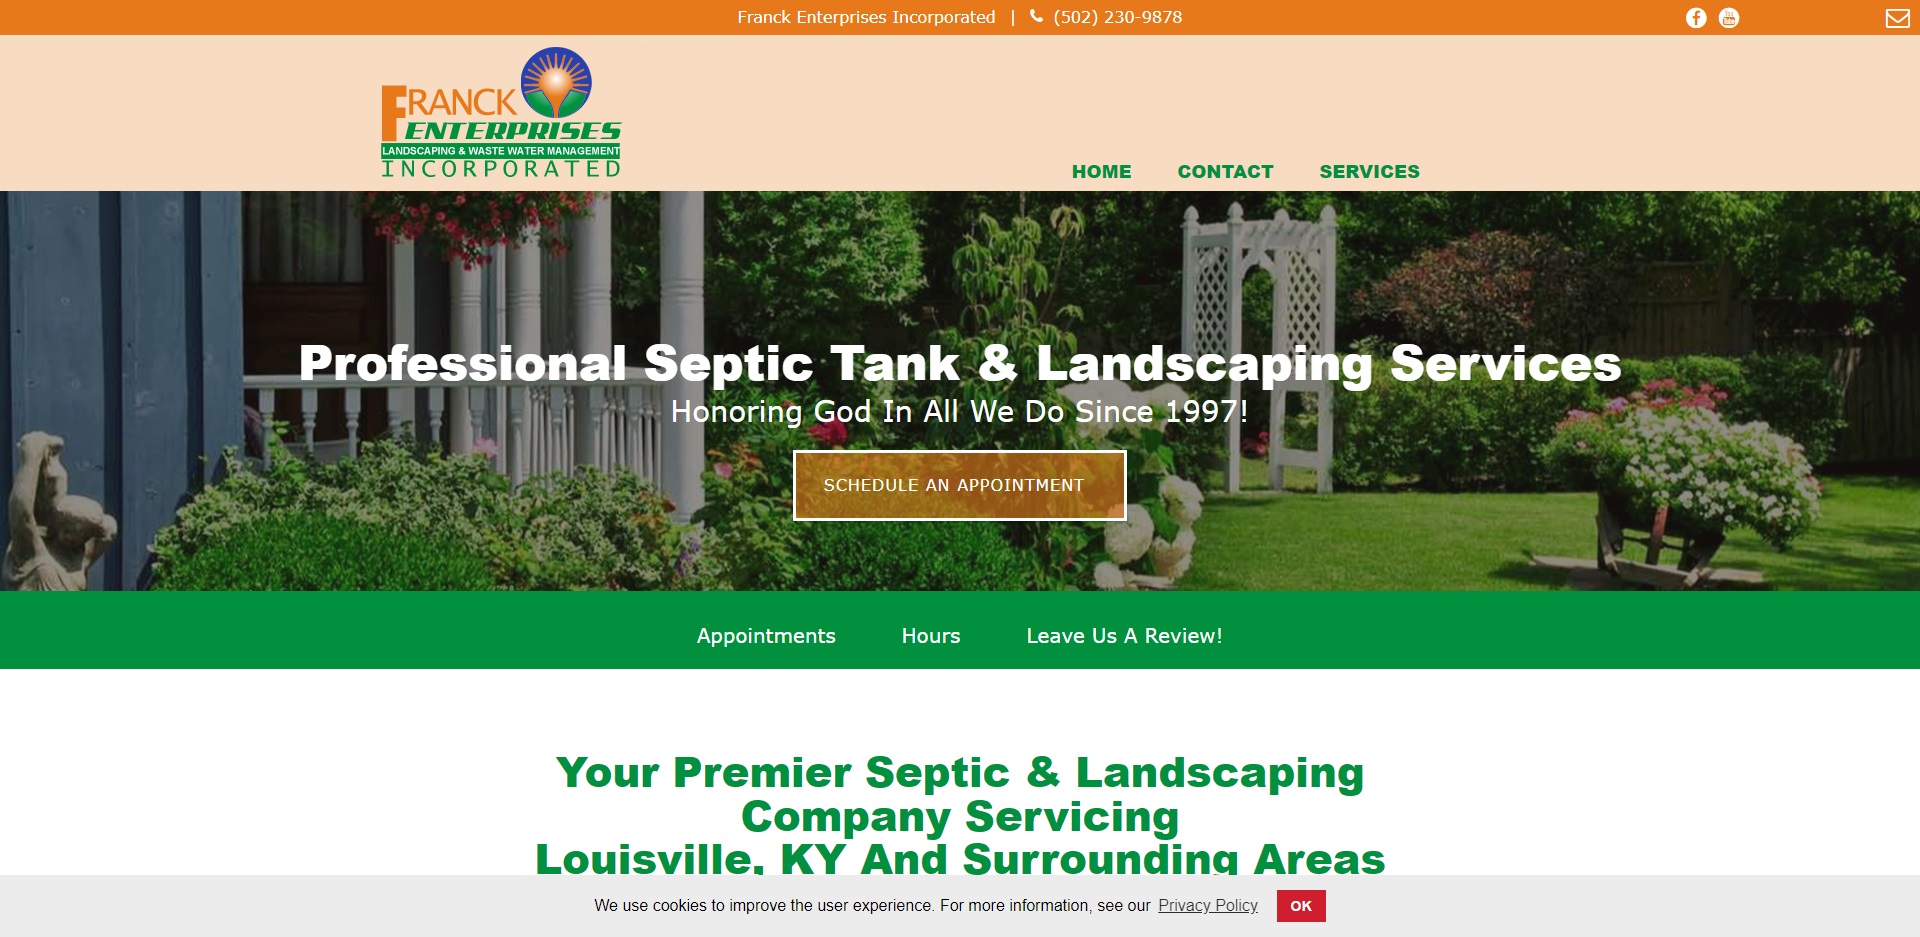 The Best Septic Tank Services in Louisville, KY